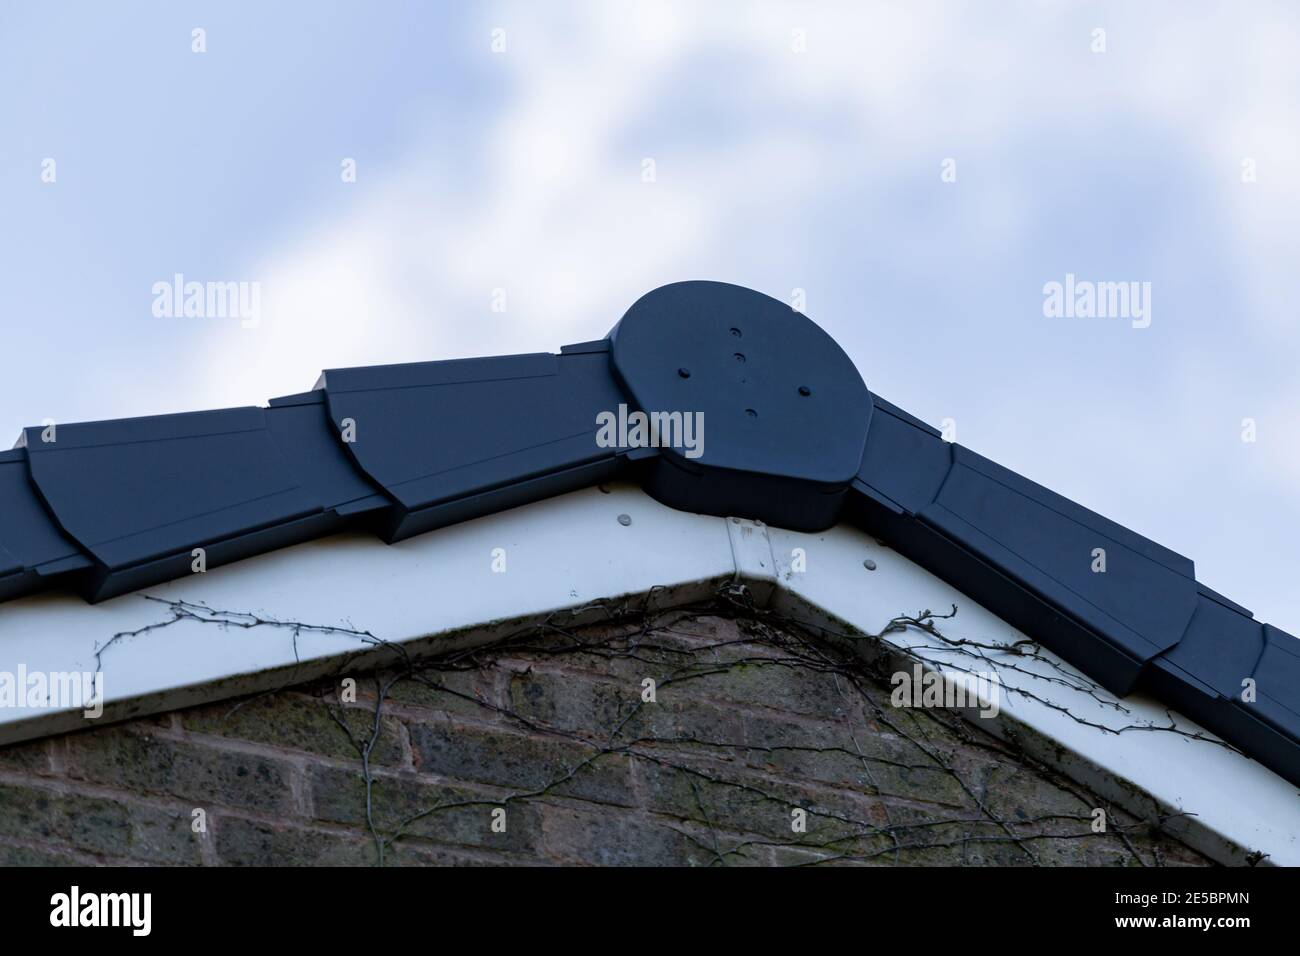 A dry verge system on the roof of a house. Stock Photo